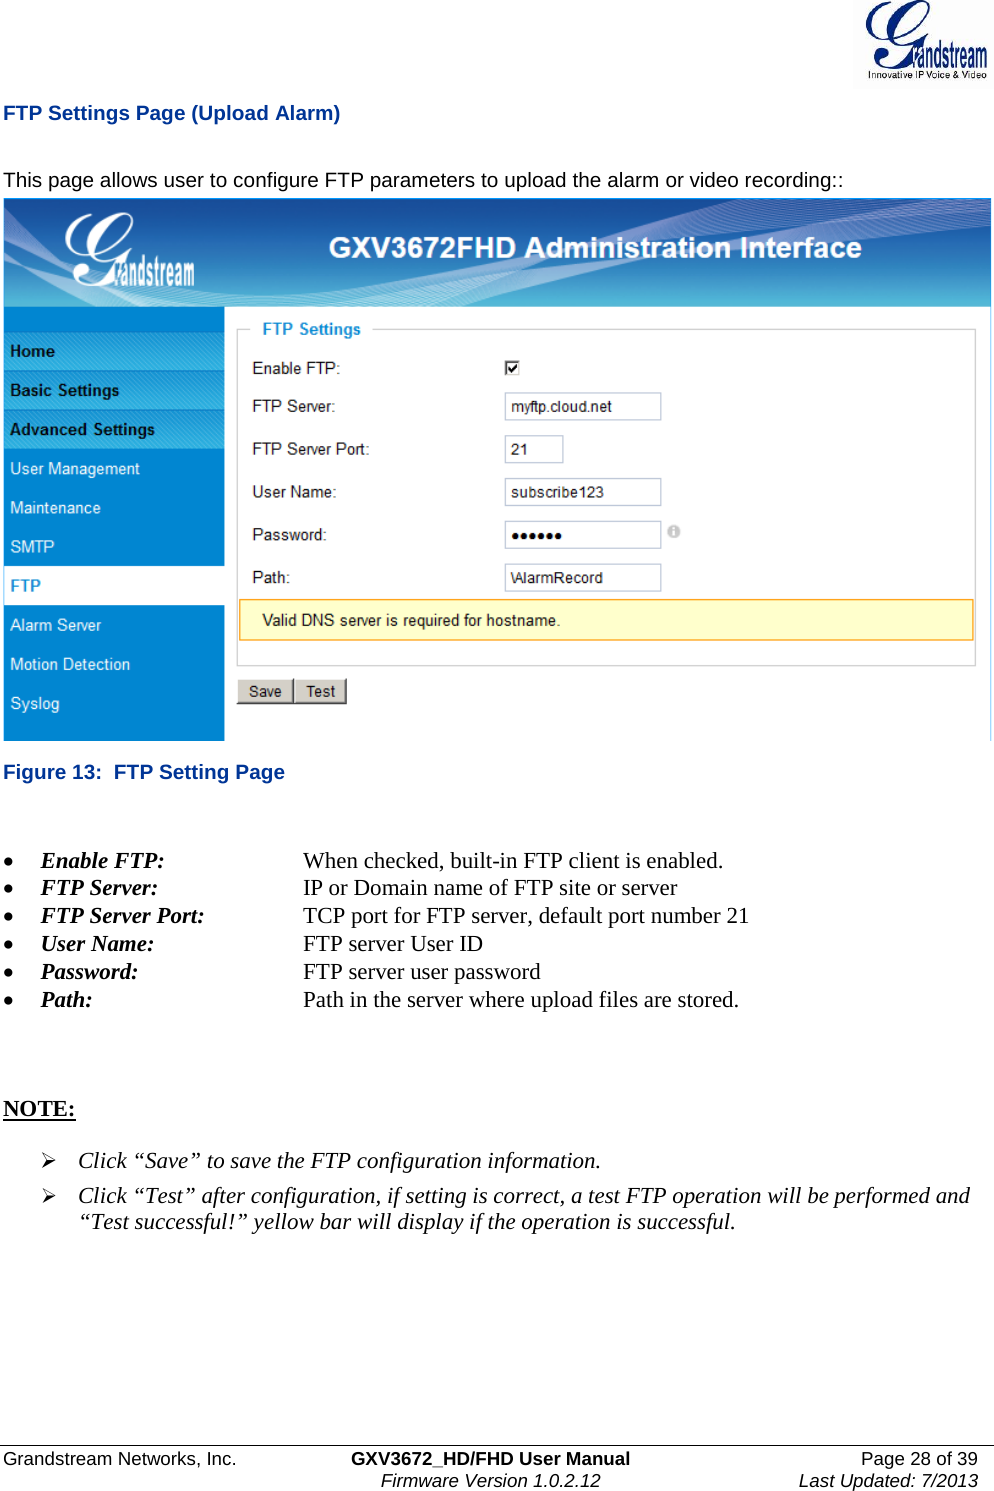  Grandstream Networks, Inc. GXV3672_HD/FHD User Manual Page 28 of 39   Firmware Version 1.0.2.12 Last Updated: 7/2013  FTP Settings Page (Upload Alarm)  This page allows user to configure FTP parameters to upload the alarm or video recording::  Figure 13:  FTP Setting Page  • Enable FTP:     When checked, built-in FTP client is enabled.  • FTP Server:     IP or Domain name of FTP site or server • FTP Server Port:     TCP port for FTP server, default port number 21 • User Name:     FTP server User ID • Password:      FTP server user password • Path:       Path in the server where upload files are stored.     NOTE:    Click “Save” to save the FTP configuration information.  Click “Test” after configuration, if setting is correct, a test FTP operation will be performed and “Test successful!” yellow bar will display if the operation is successful.  